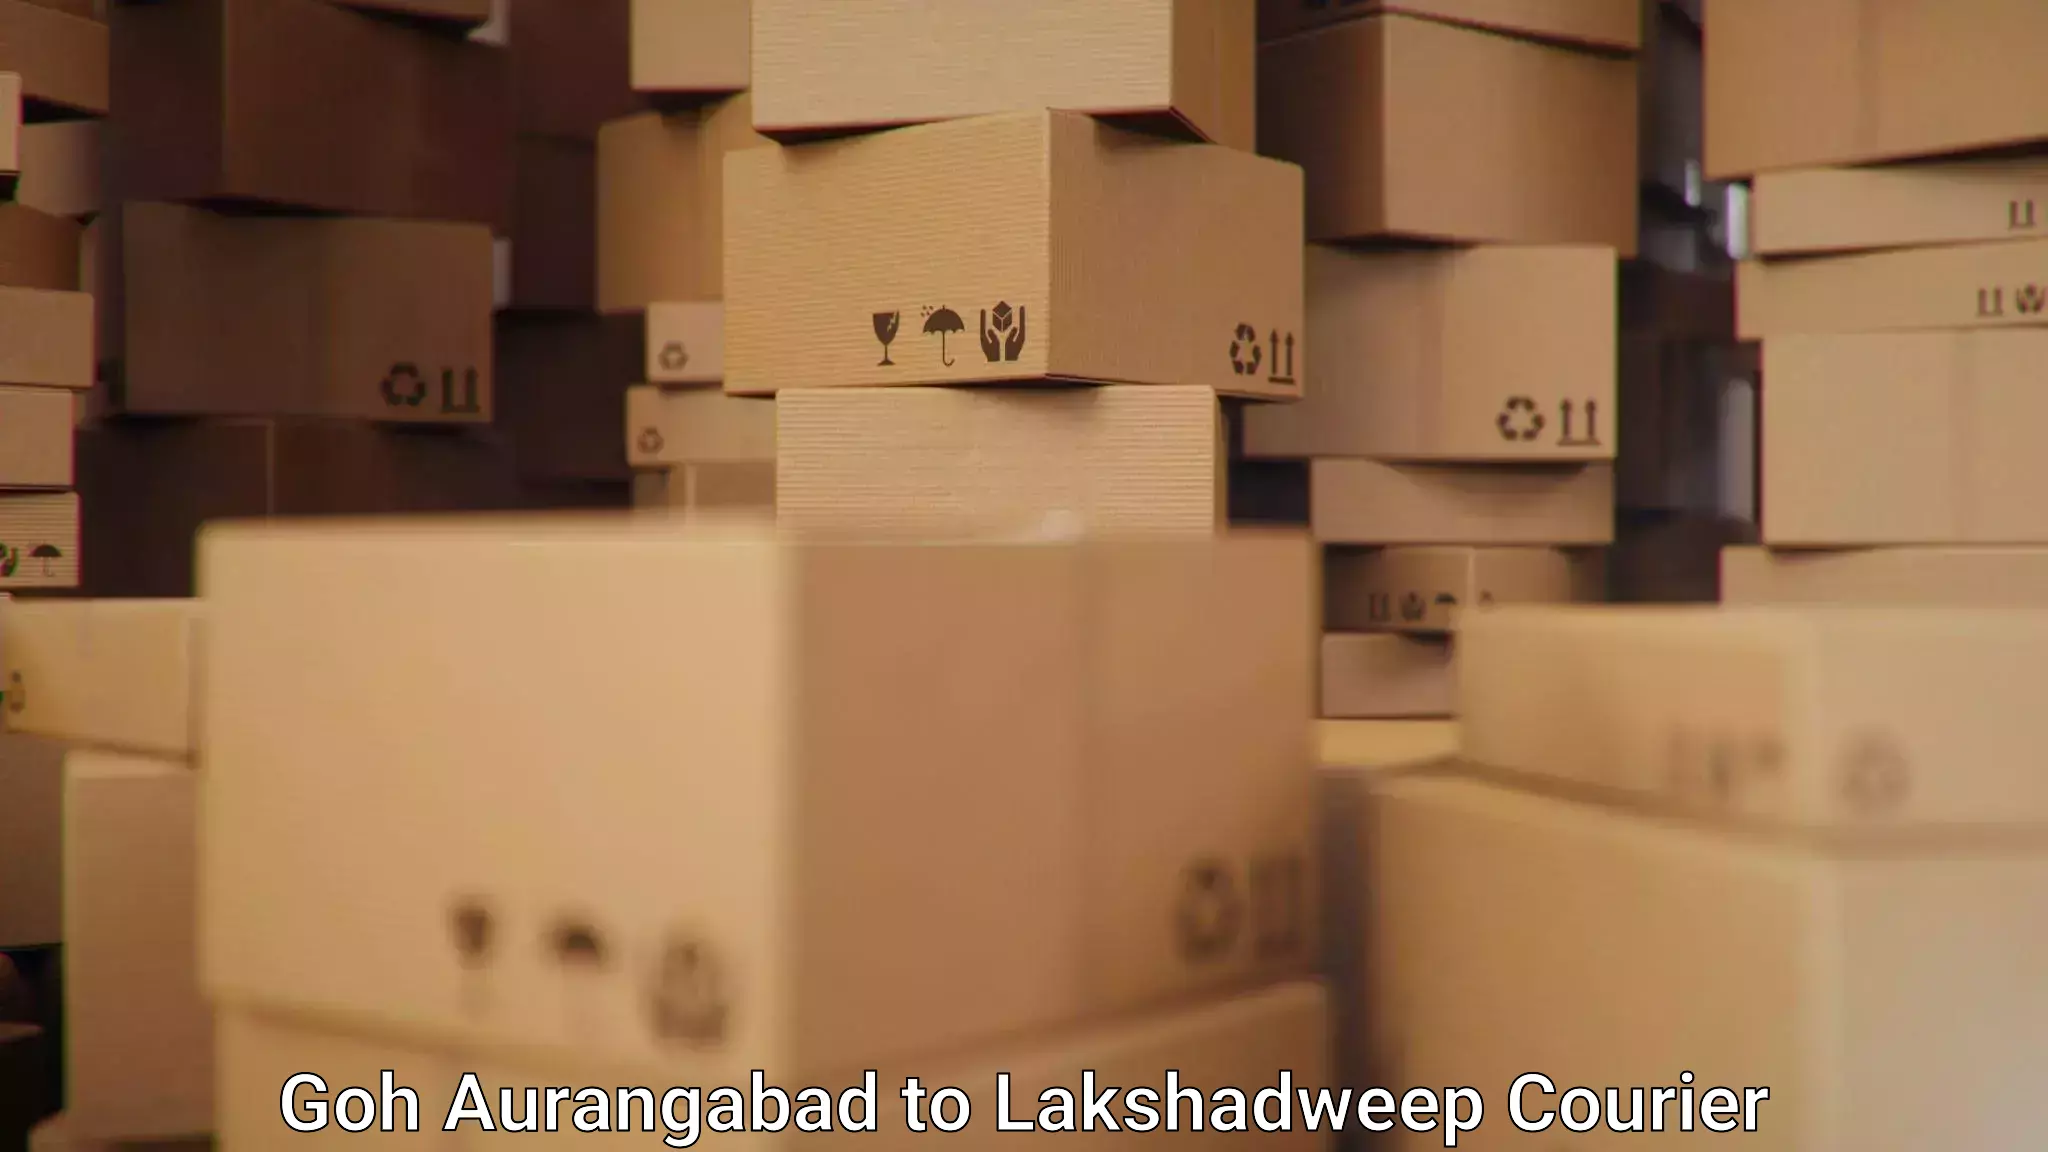 Fast-track shipping solutions in Goh Aurangabad to Lakshadweep